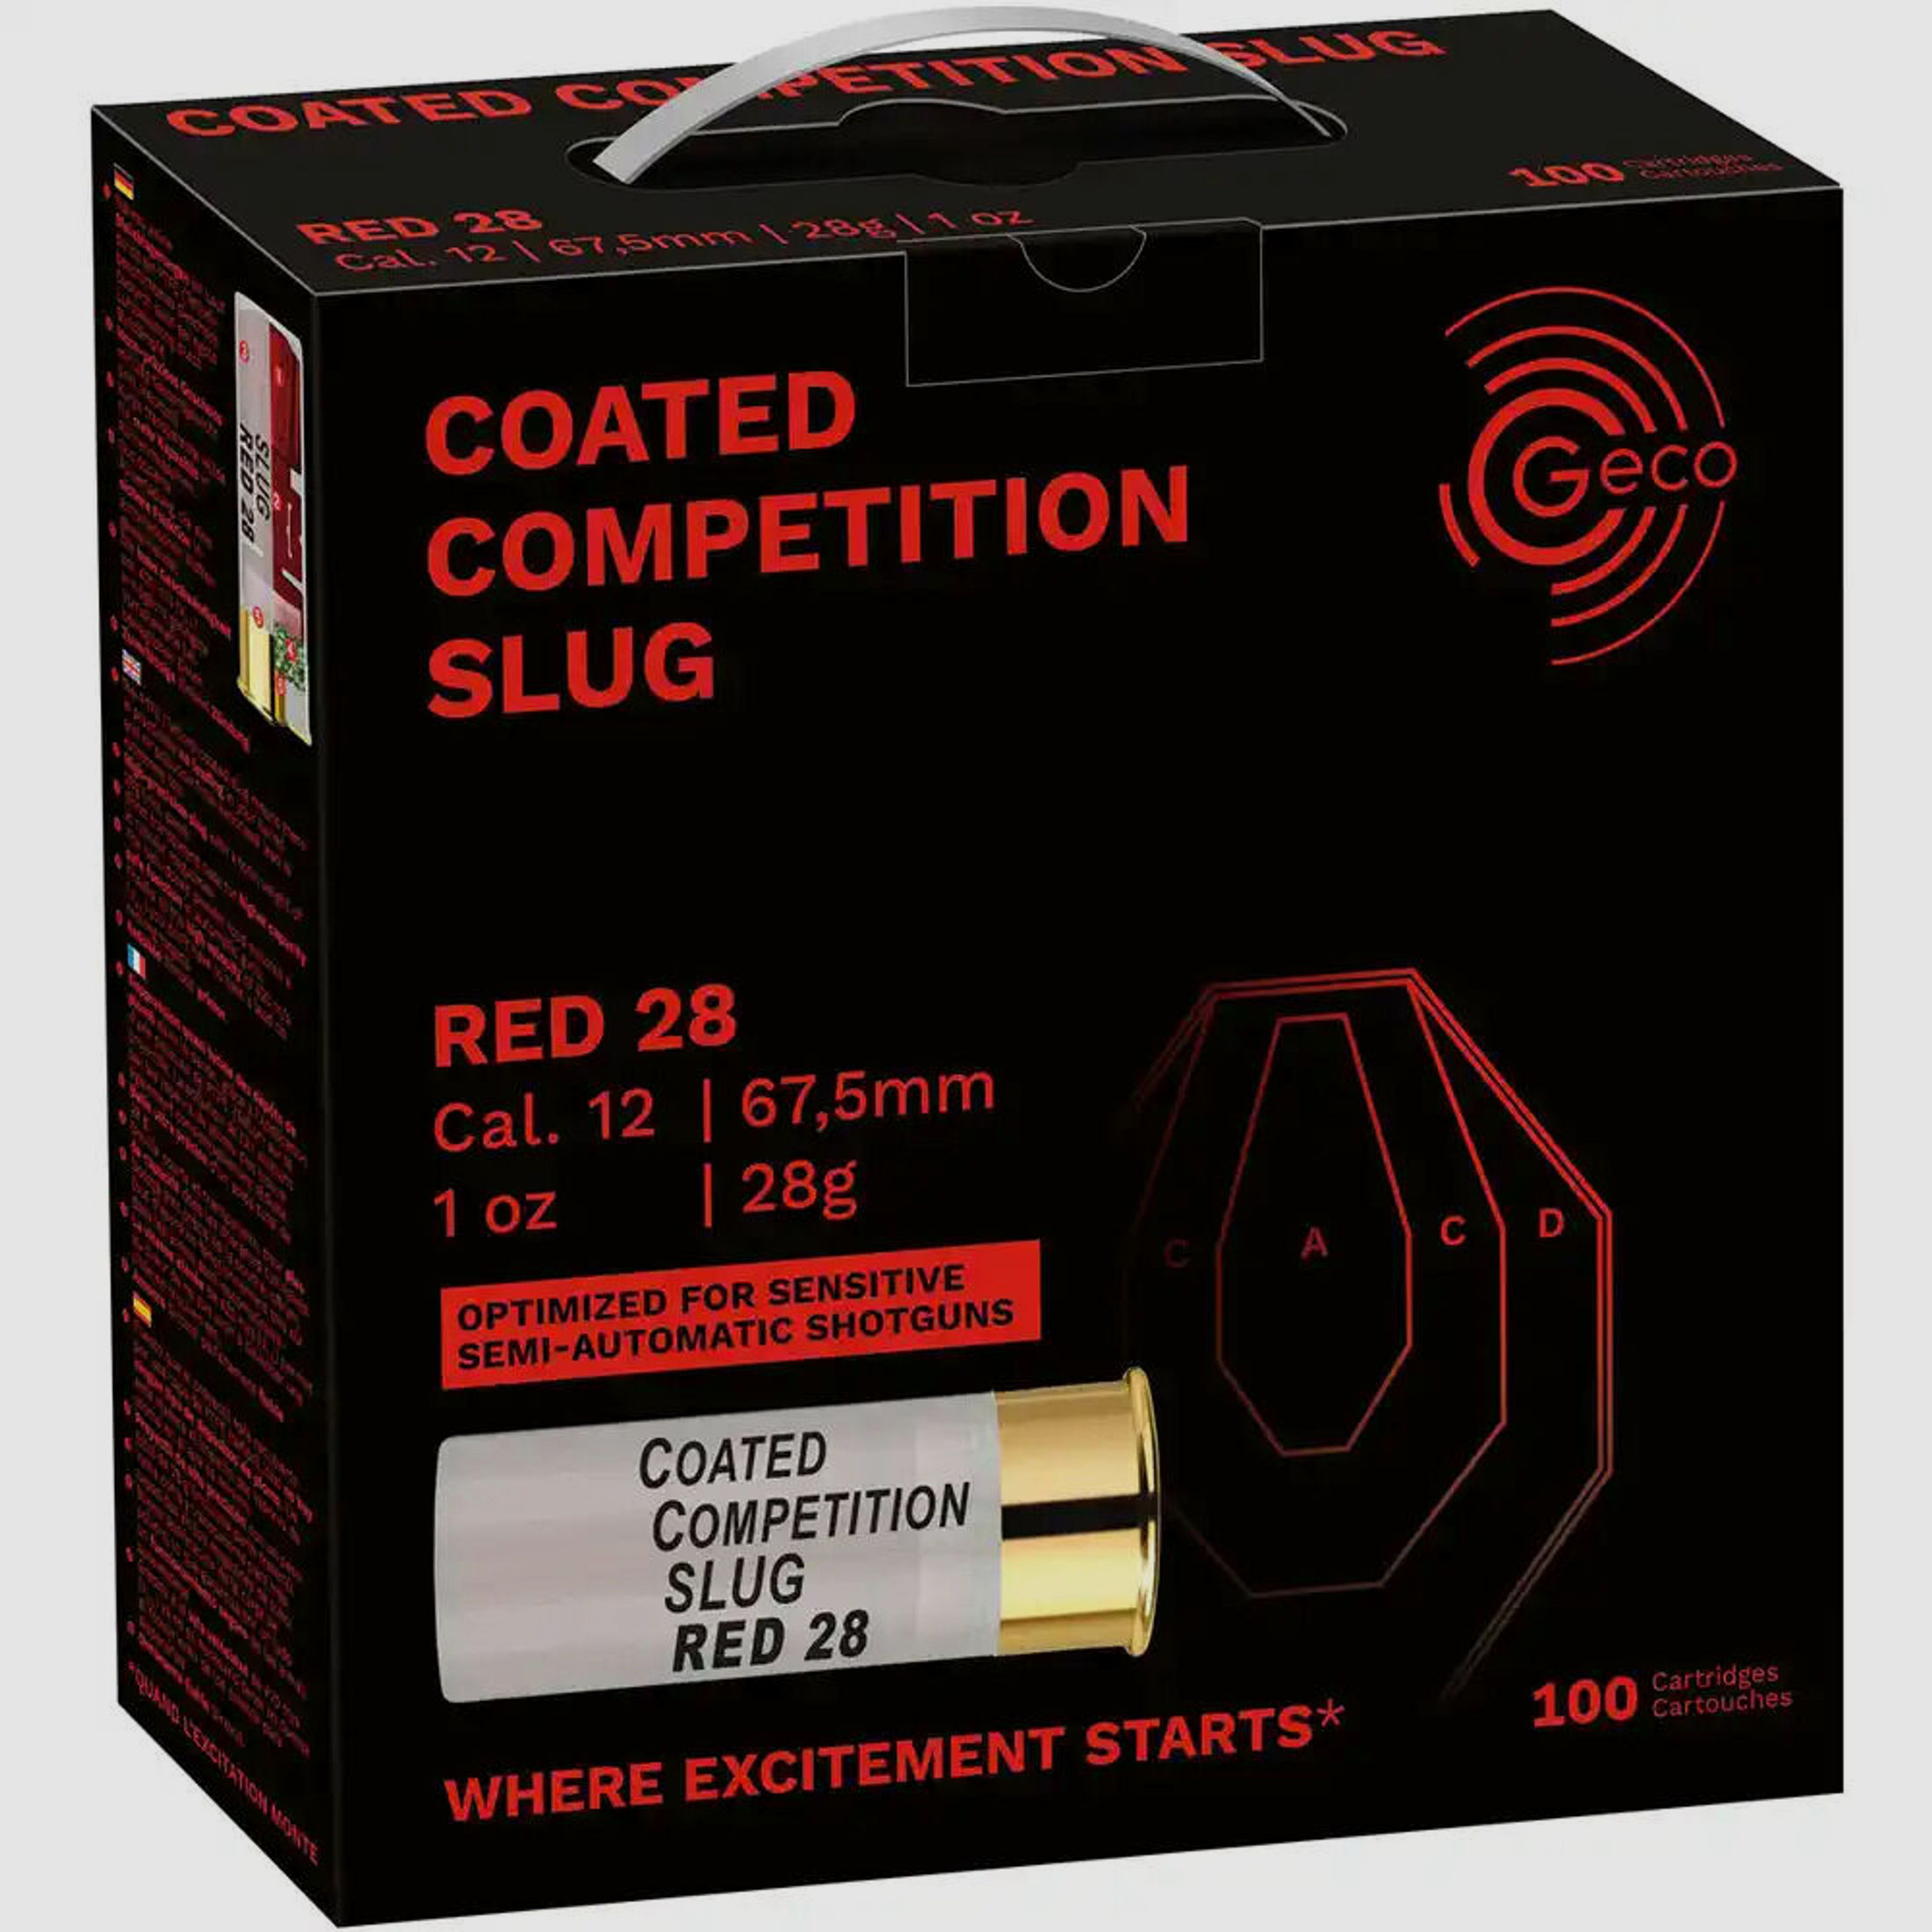 Geco	 Slugs Red 28 Coated Competition